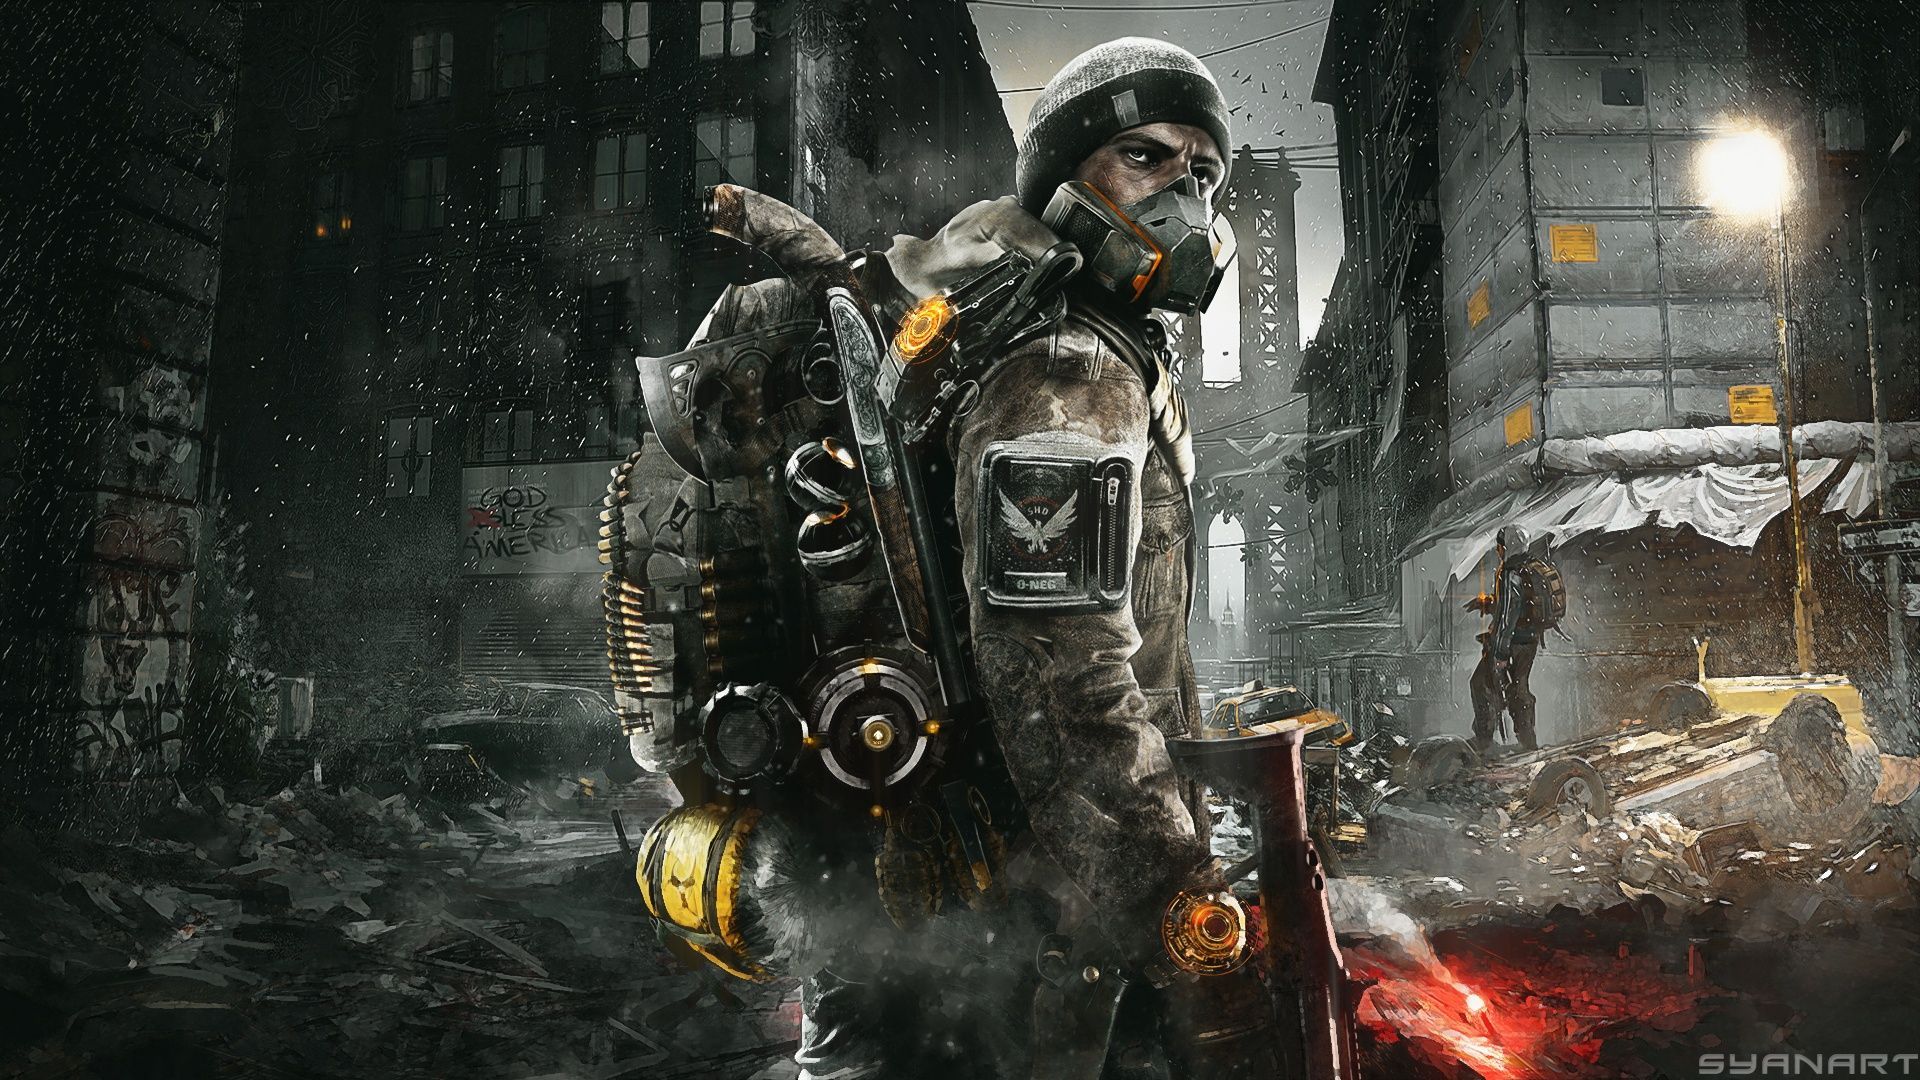 The Division Wallpaper 1920×1080 Tom Clancy's The Division Wallpaper (28 Wallpaper). Adorable Wallpaper. HD wallpaper, Division games, Wallpaper